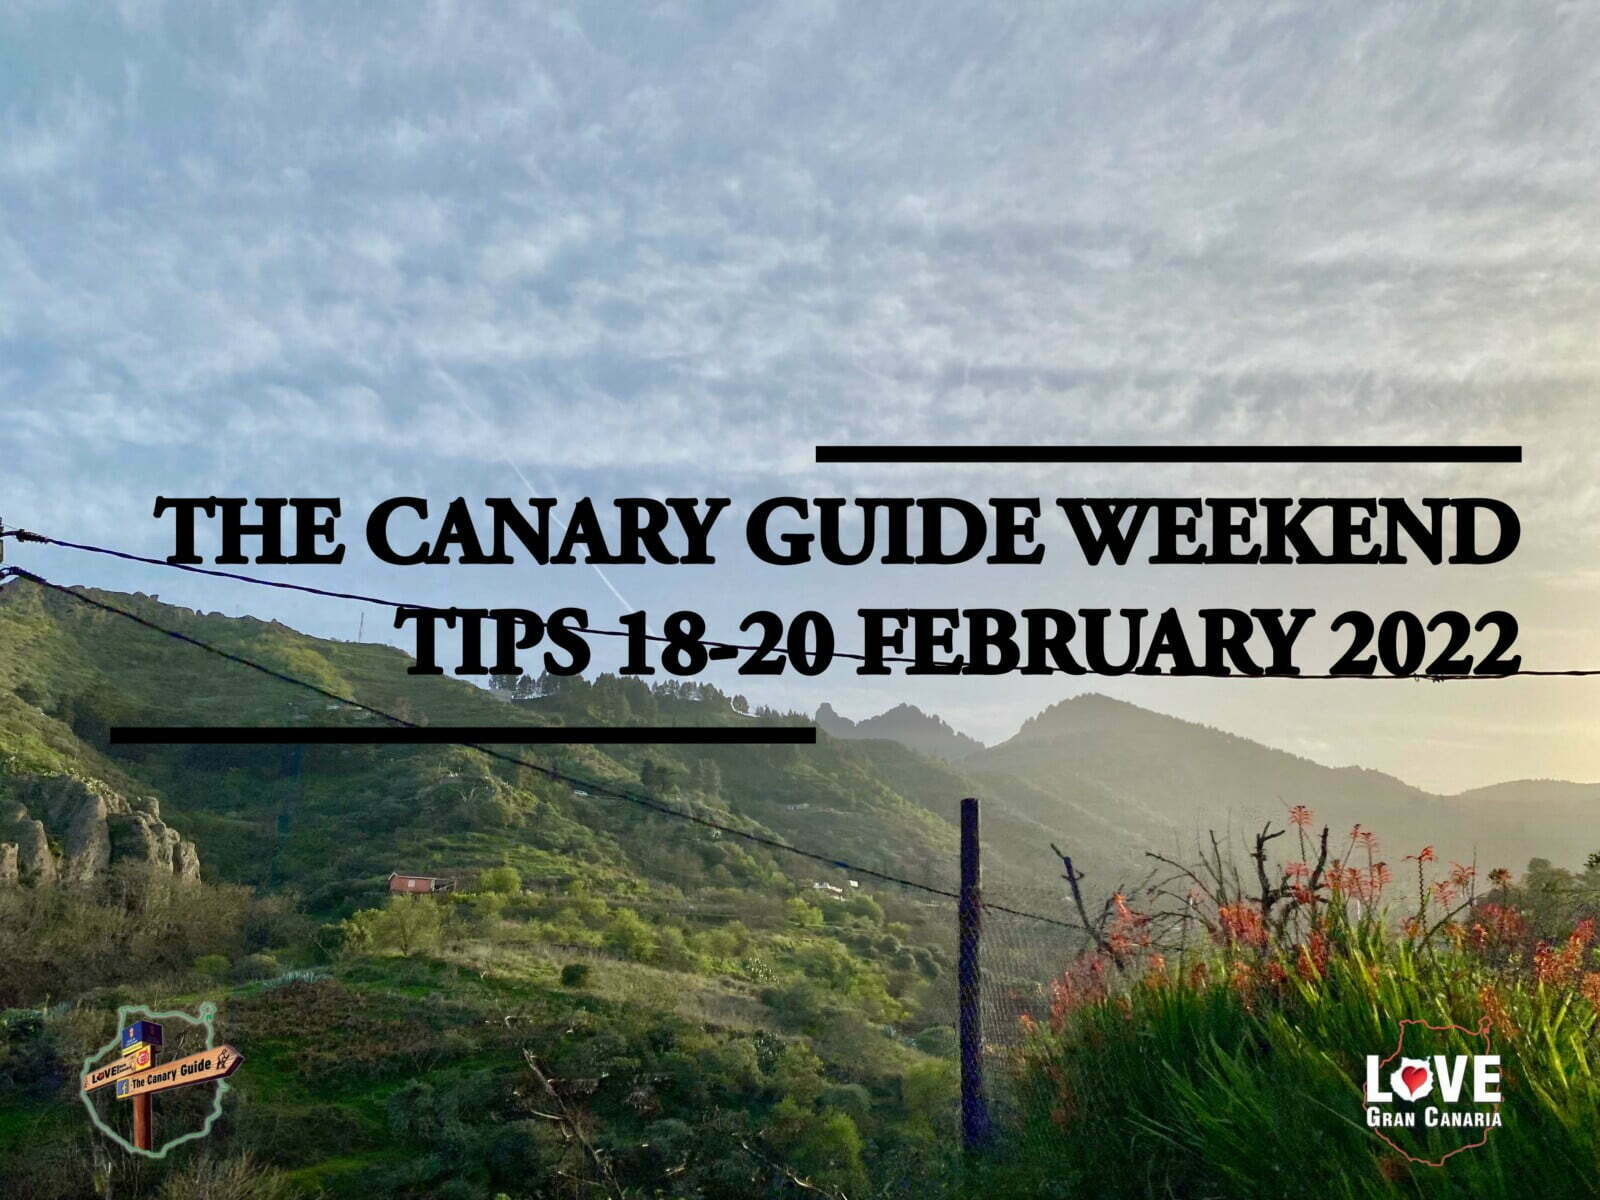 The Canary Guide #WeekendTips 18-20 February 2022